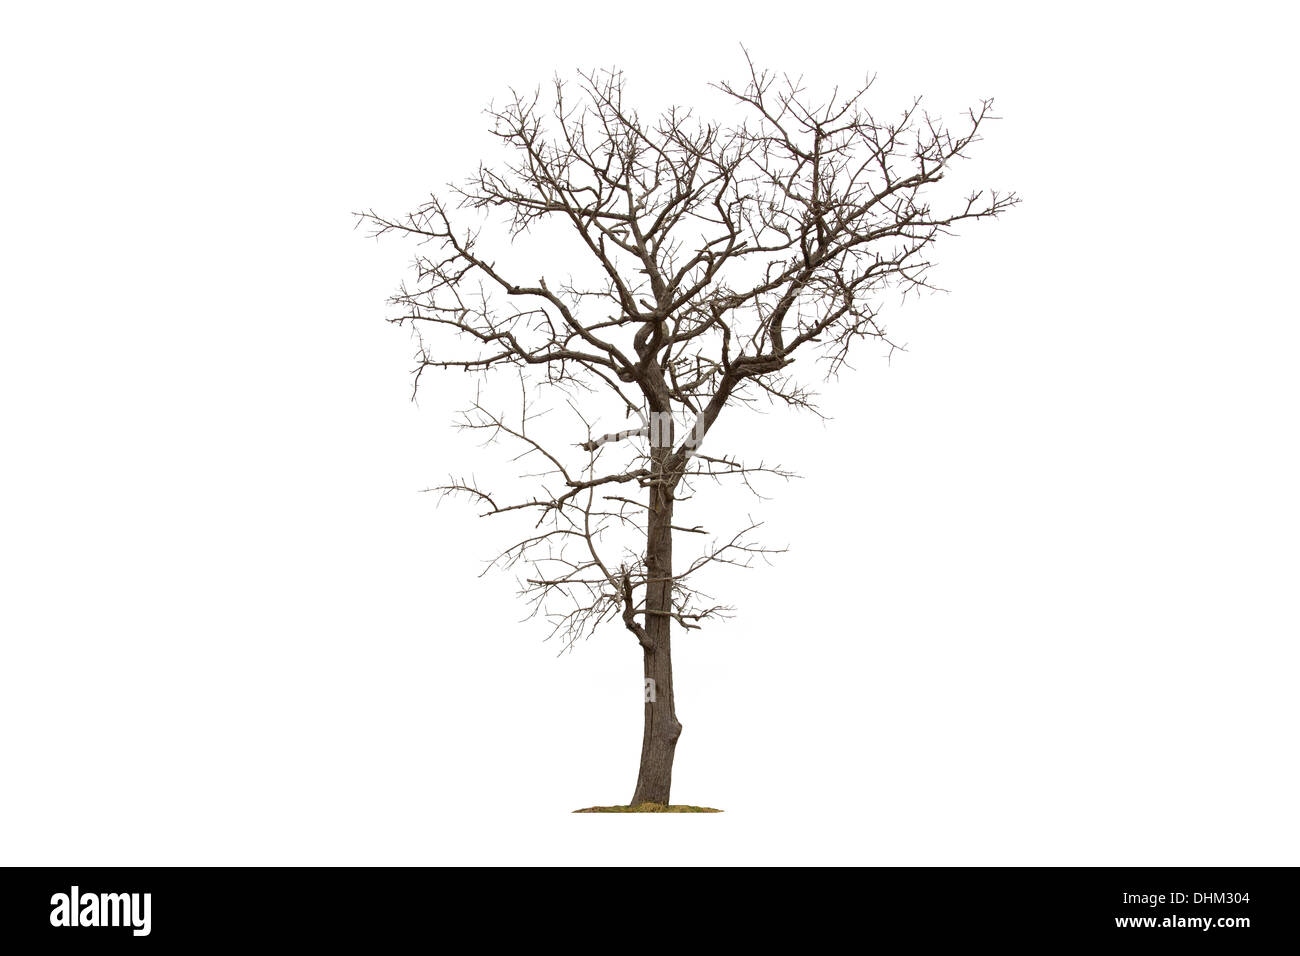 Dead tree isolated with white background Stock Photo